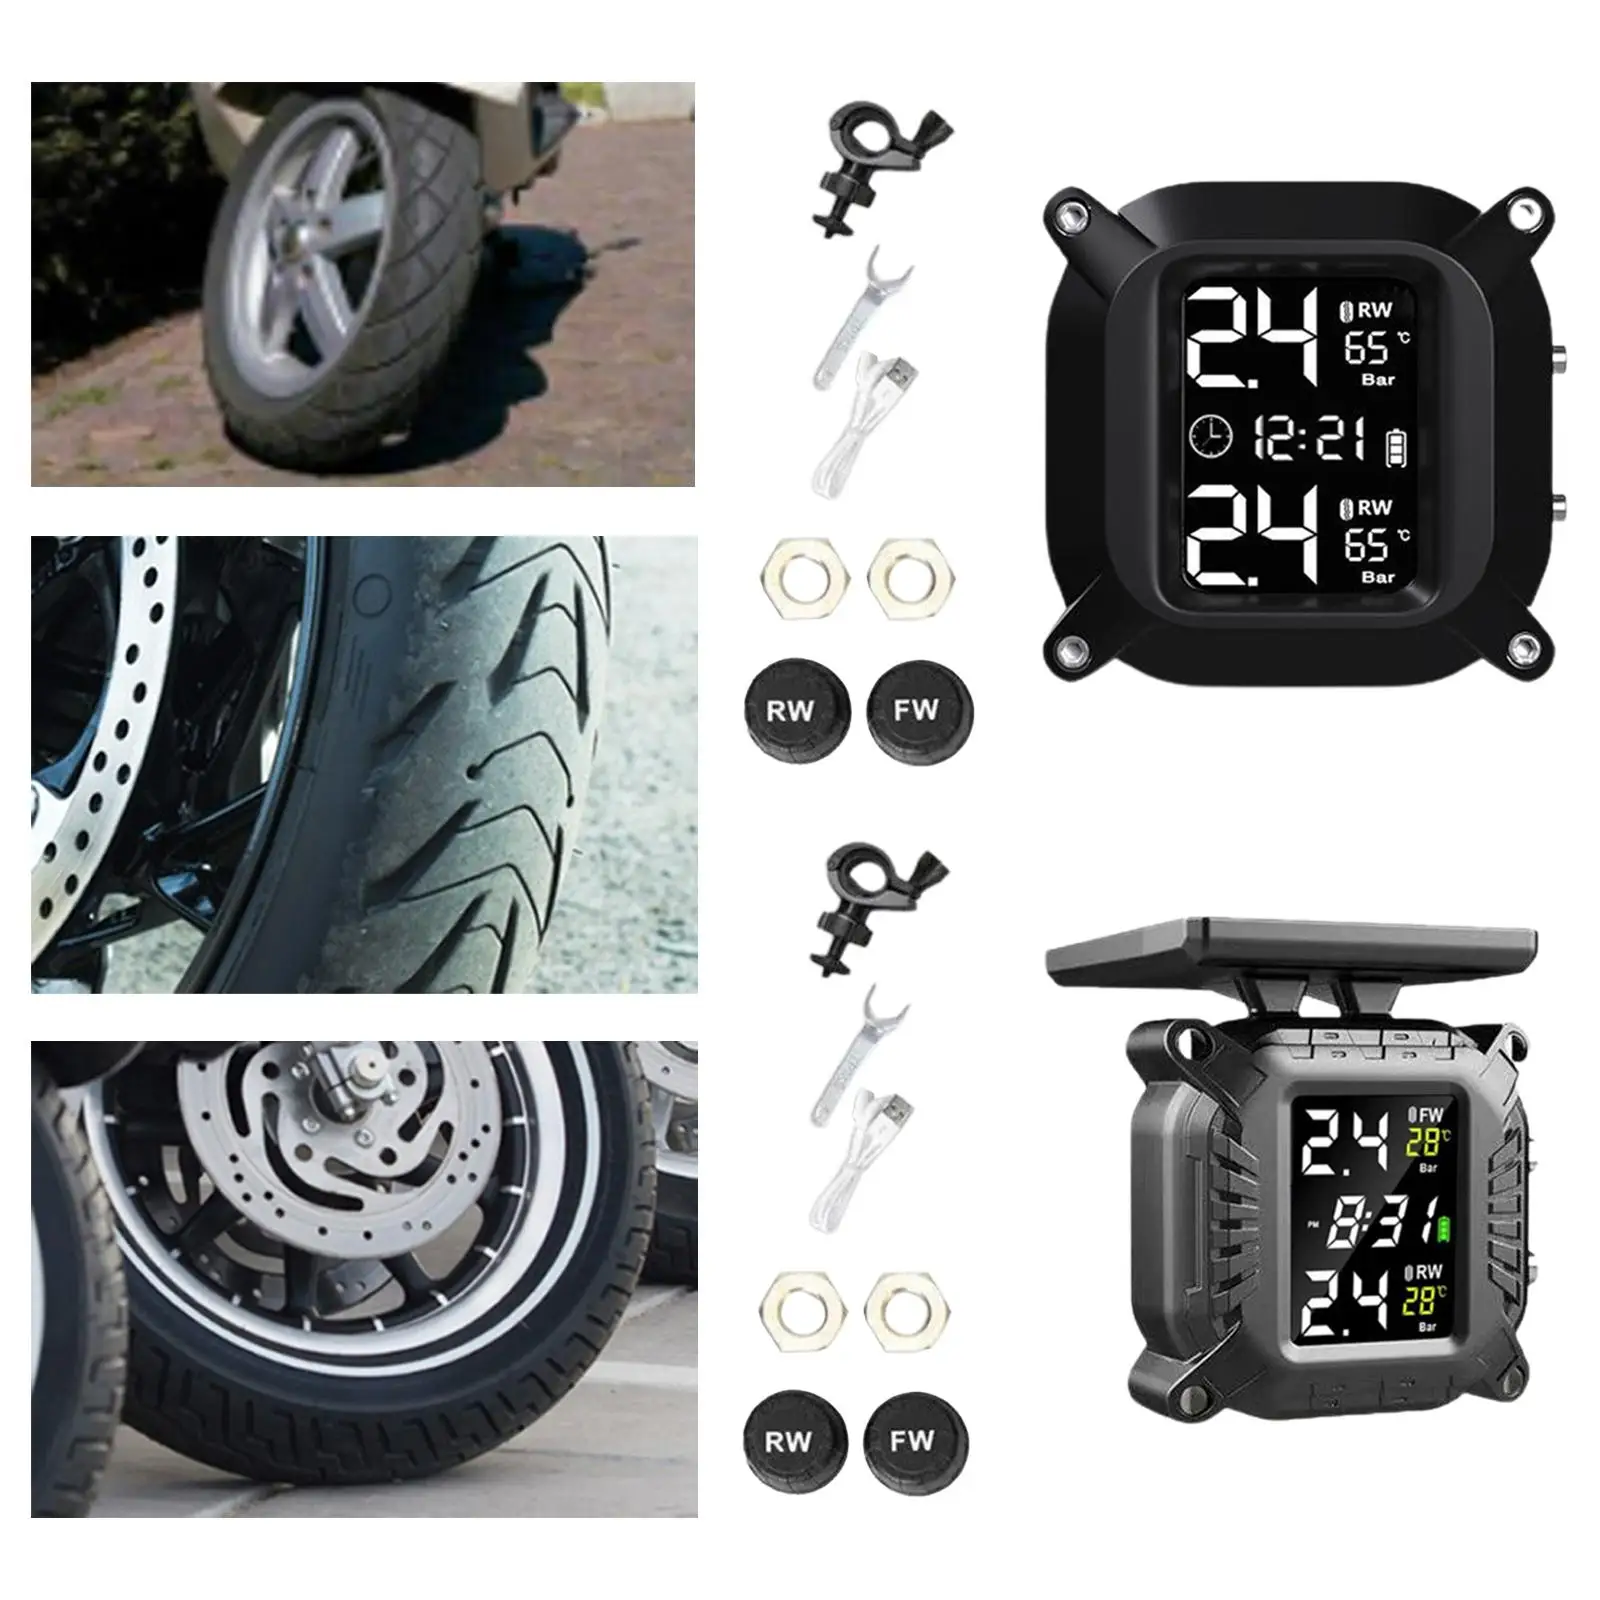 Tire Pressure Monitoring System Temperature Alarm Waterproof Smart 1100mAh with 2 Sensors Large LCD TPMS for Motorcycles